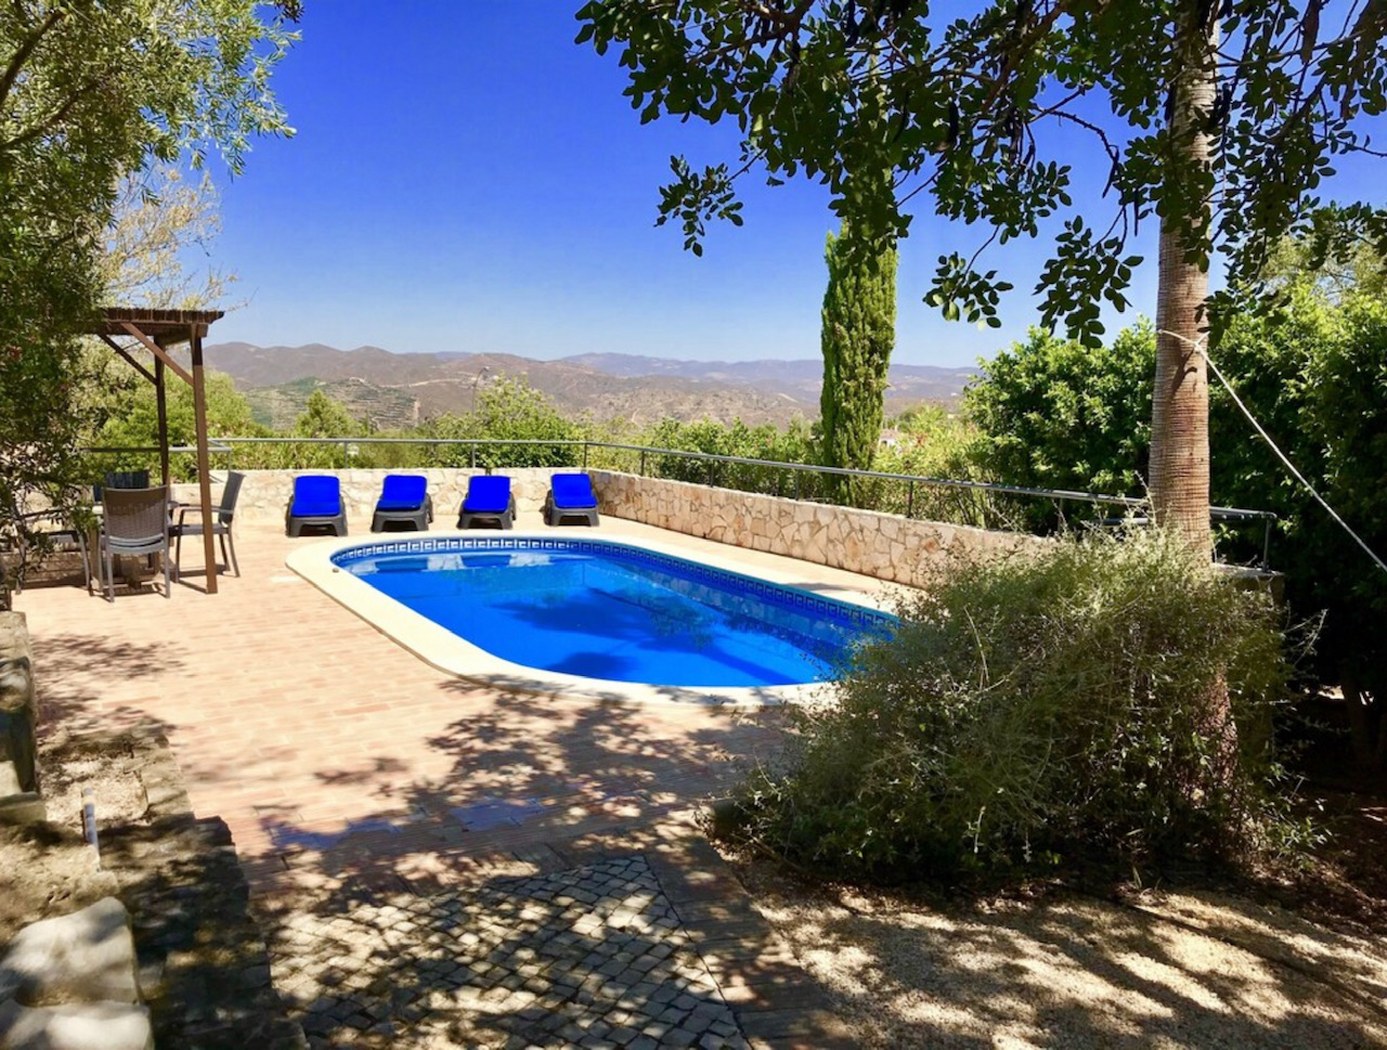 Pool at Barranco da Nora, Asseca - Charming country style villa with pool on an elevated position with magnificent views of the tranquil valley - Tavira